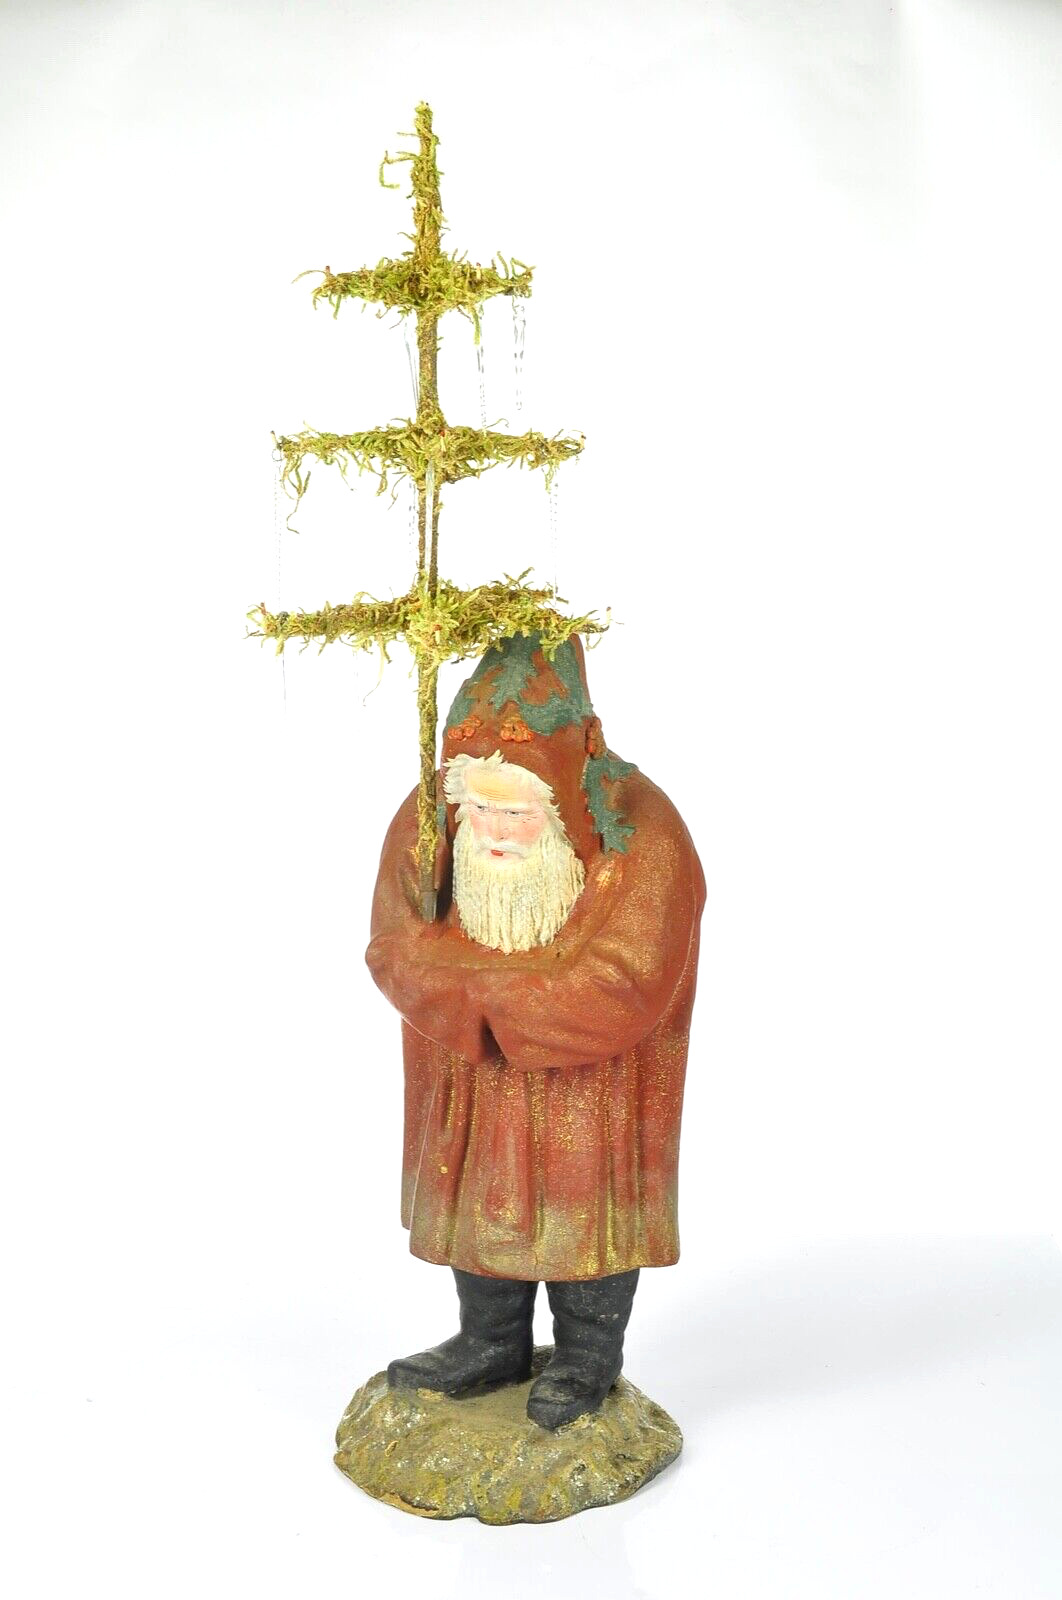 Amazing German Santa Claus/ Belsnickel Candy Container  Glassbeard approx. 1890